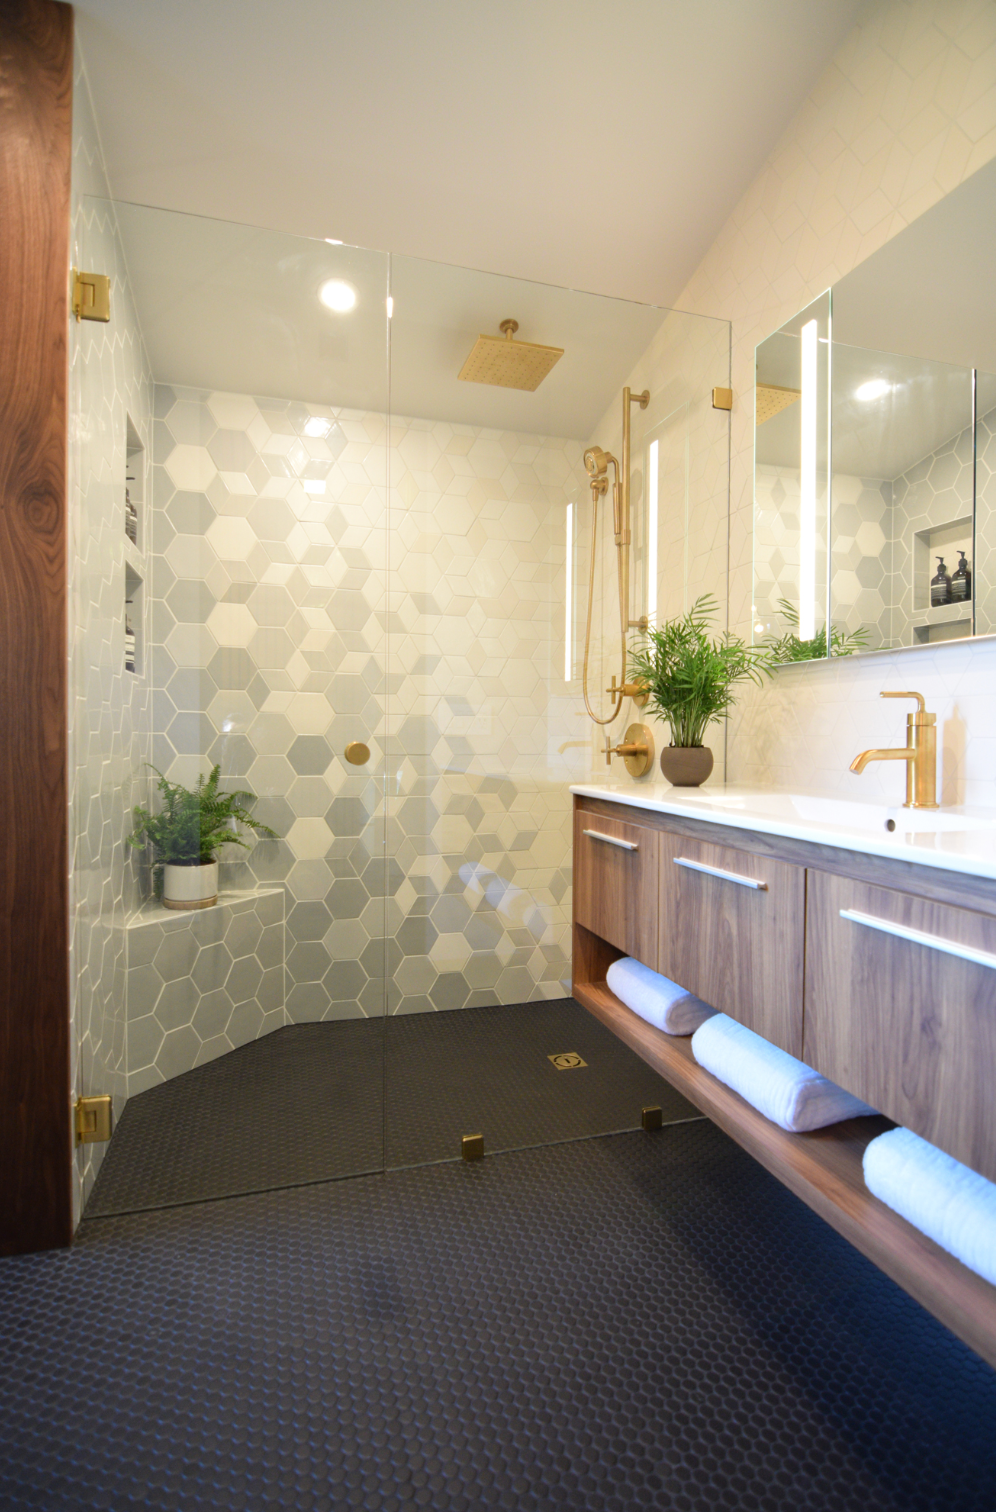 Primary Bathroom Remodel with Beautiful Details